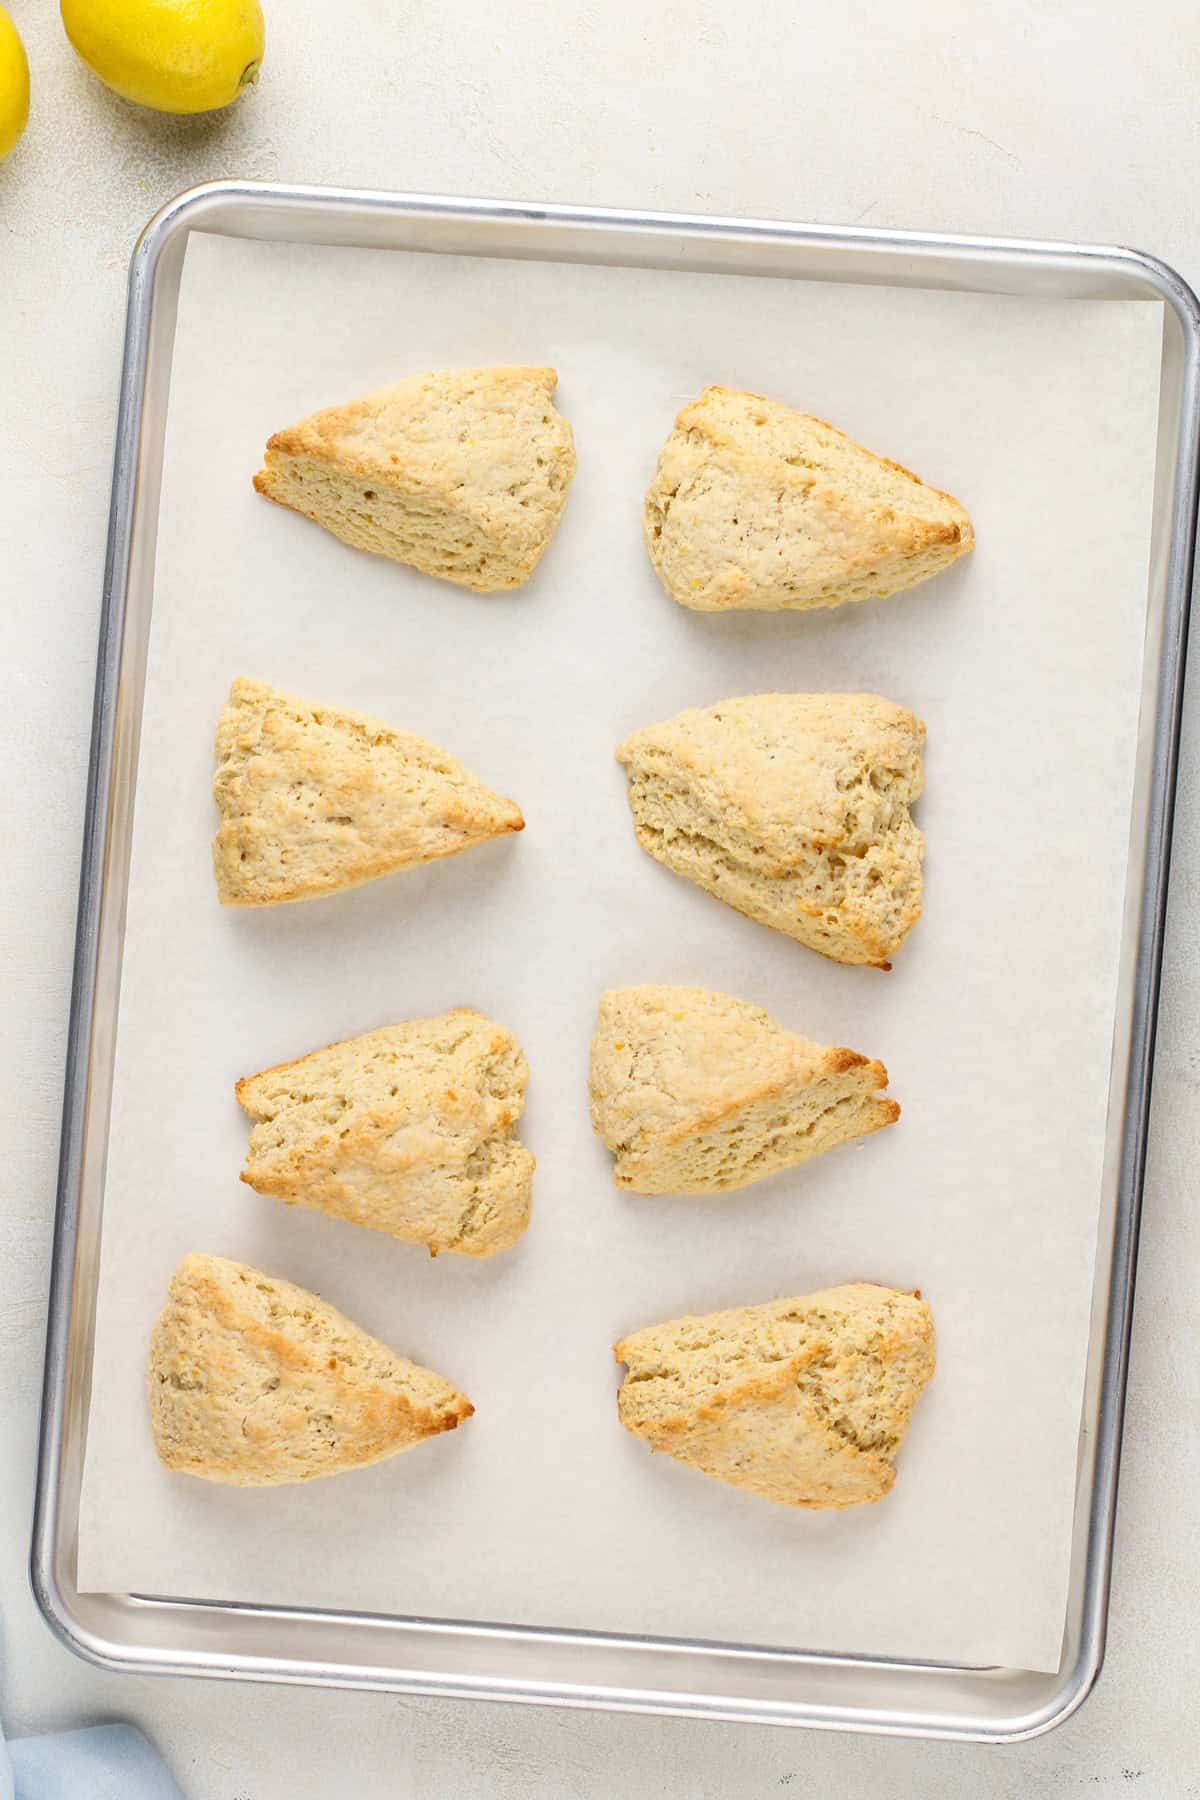 Baked lemon scones on a parchment-lined baking sheet.